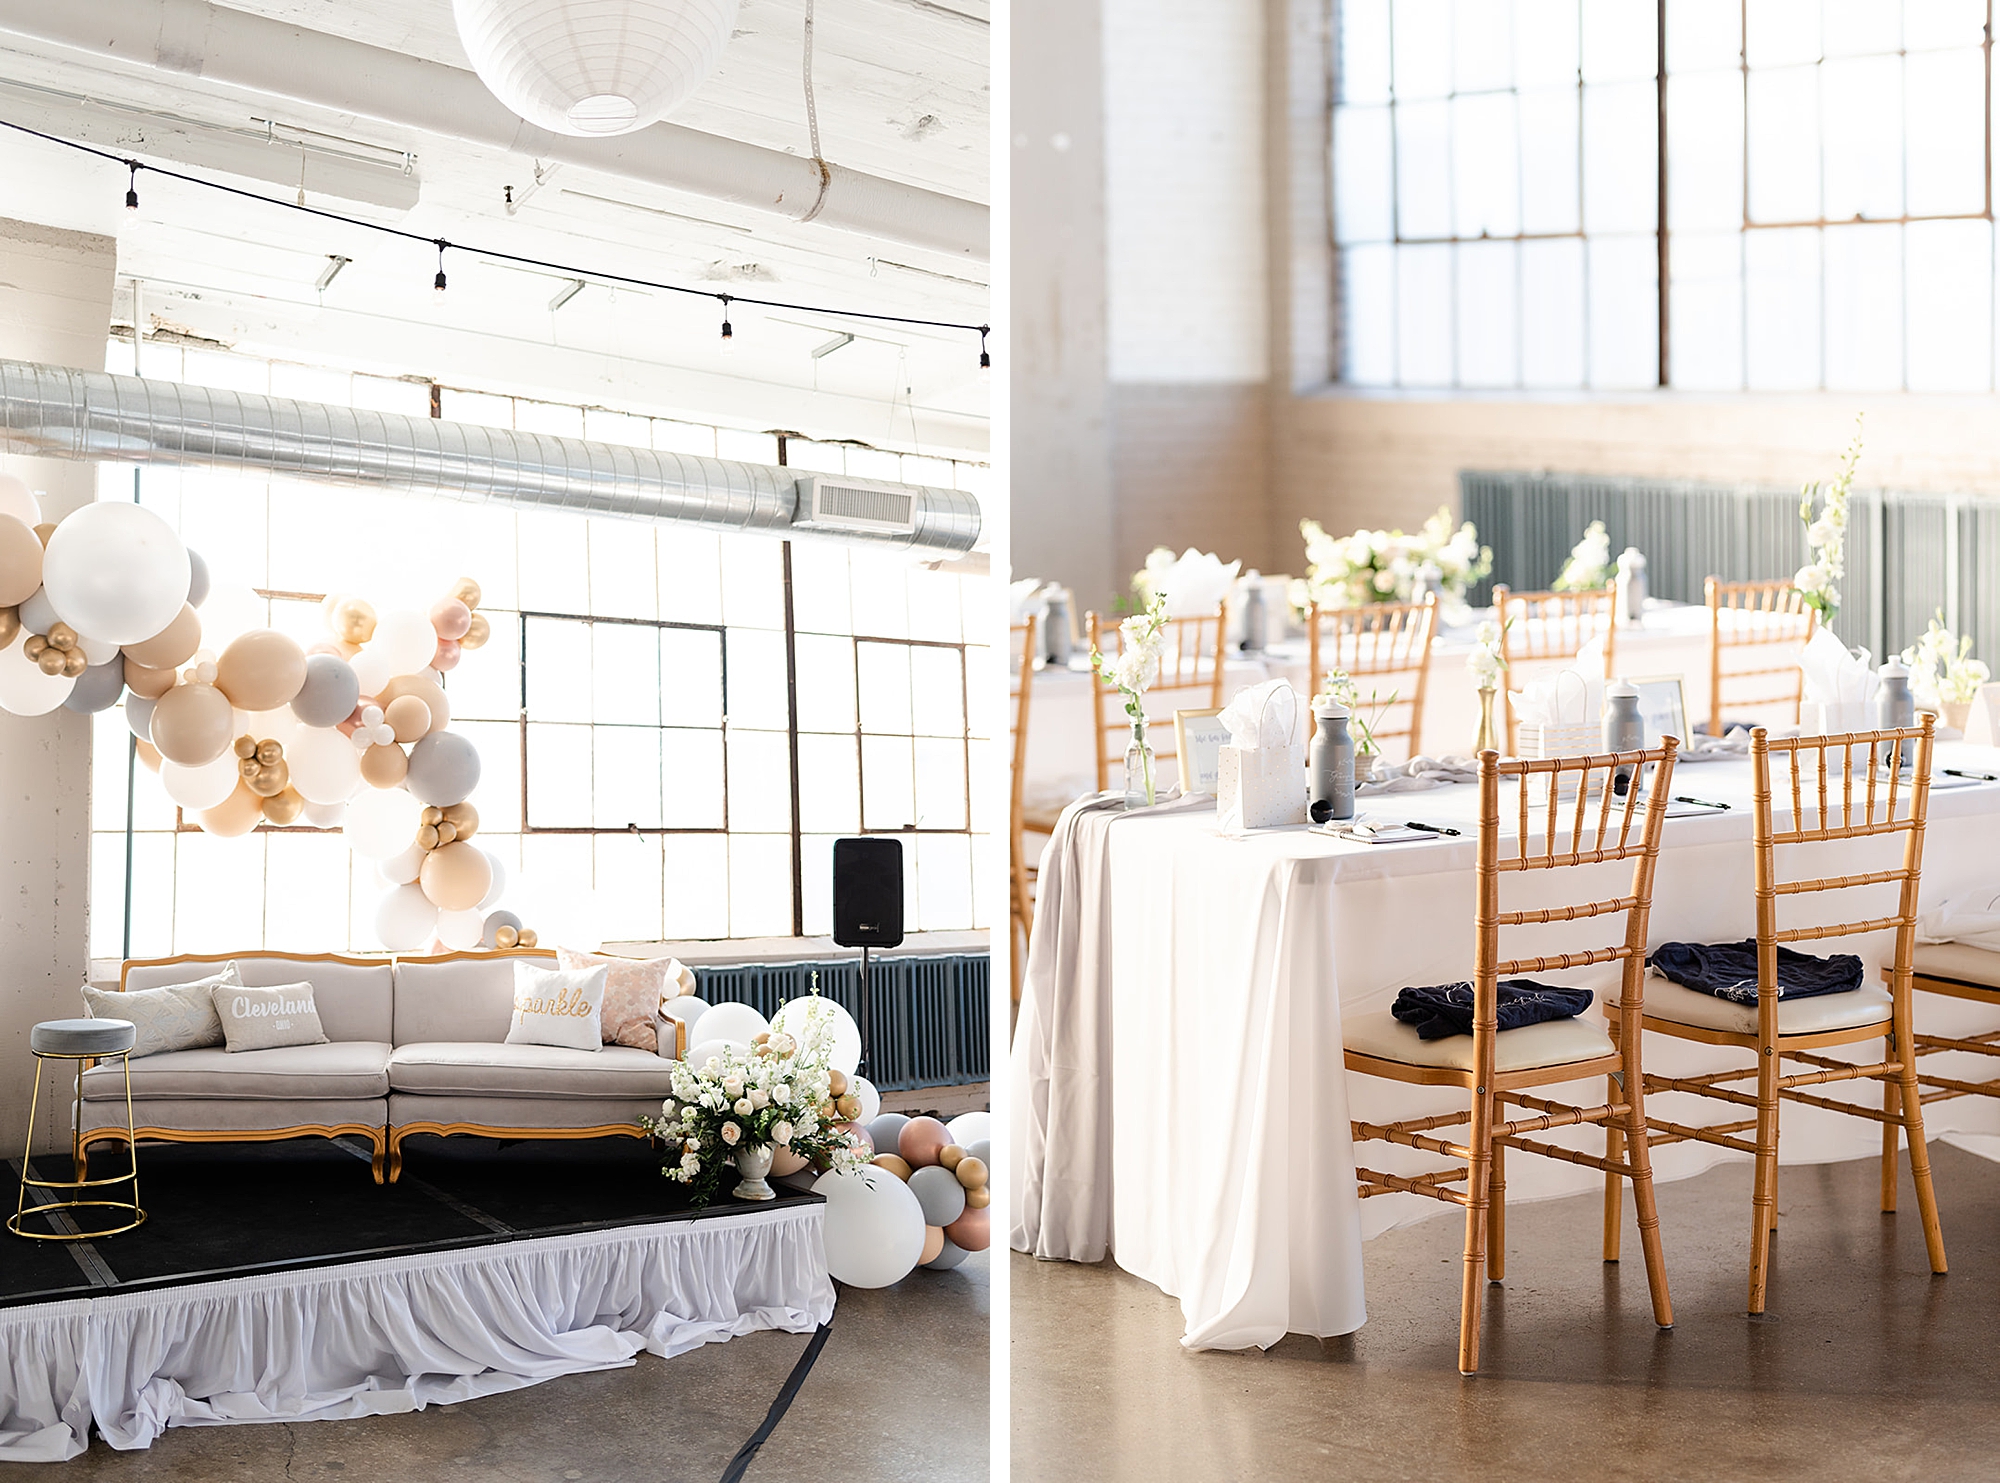 styled shoot at boutique wedding photographer's conference The Graceful Gathering